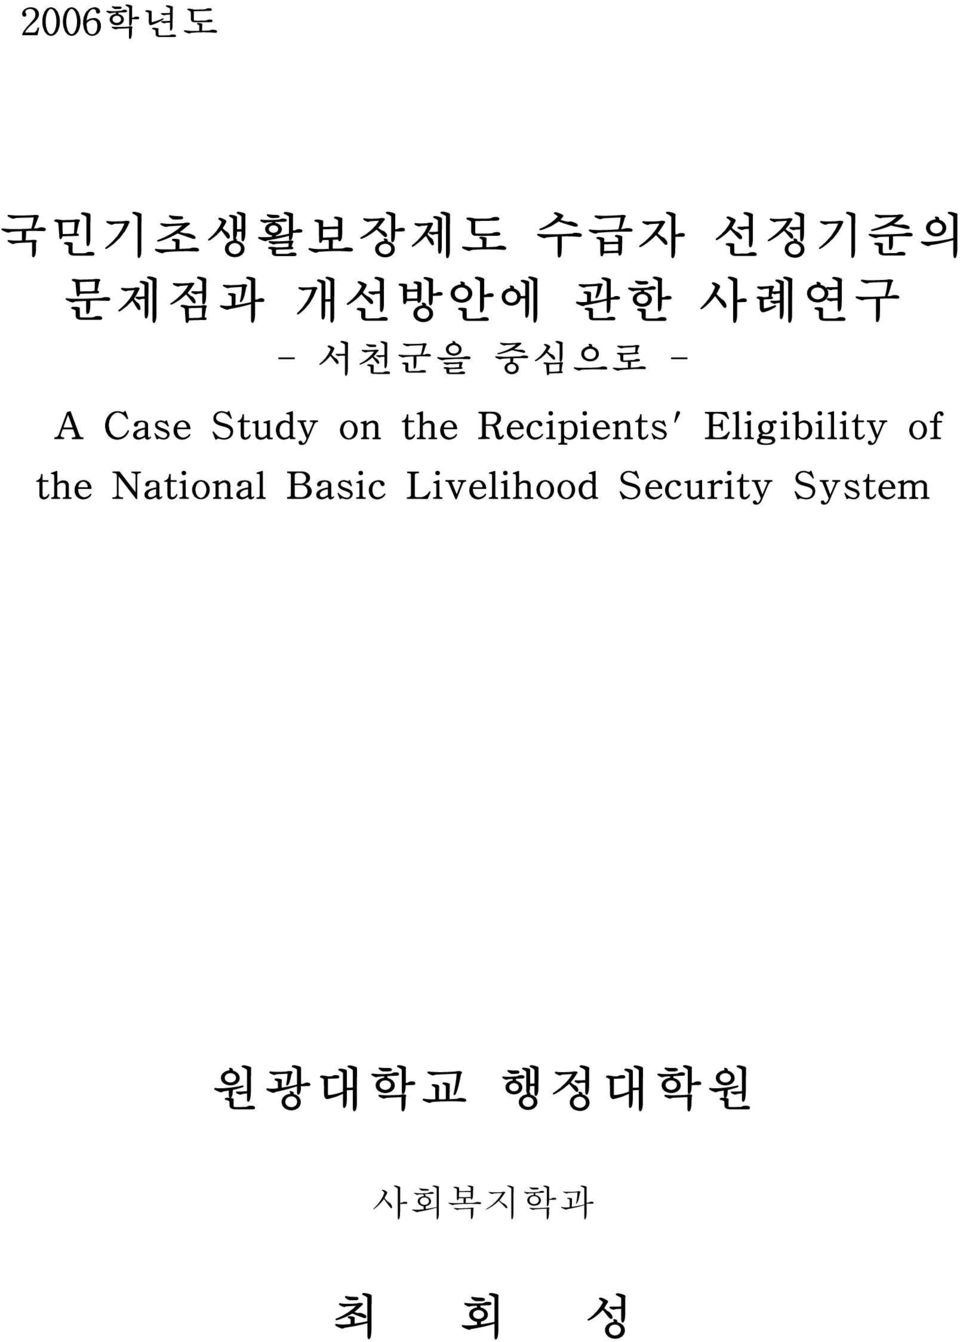 Recipients' Eligibility of the National